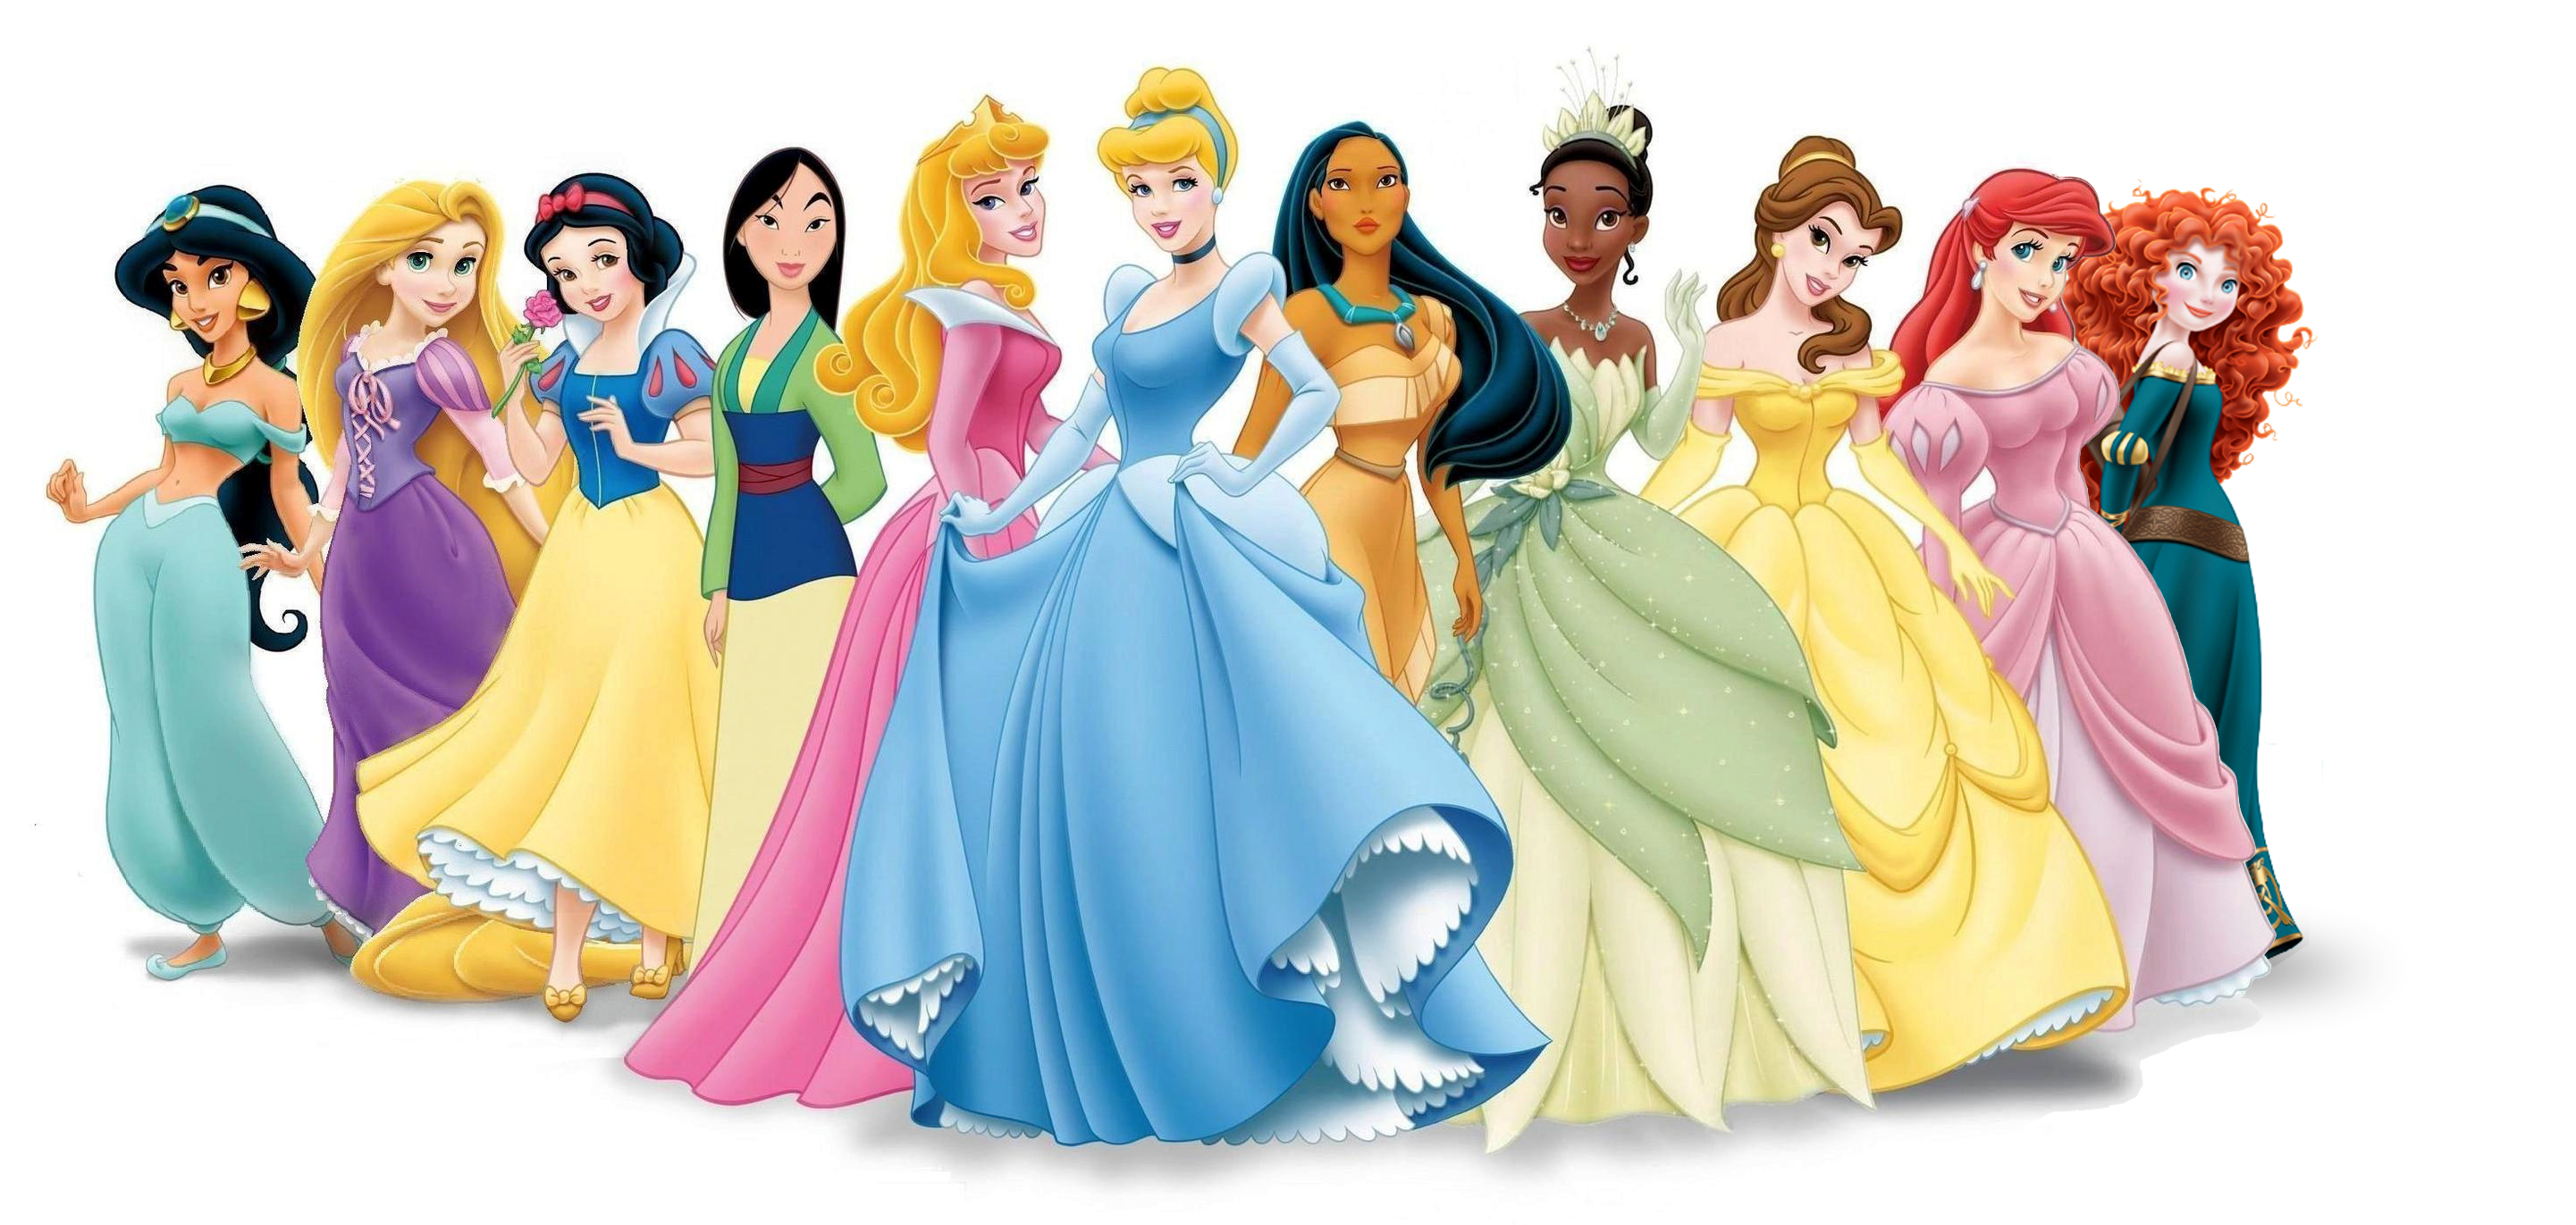 Poll: If you could spend a day with any Disney Princess, who do you choose?